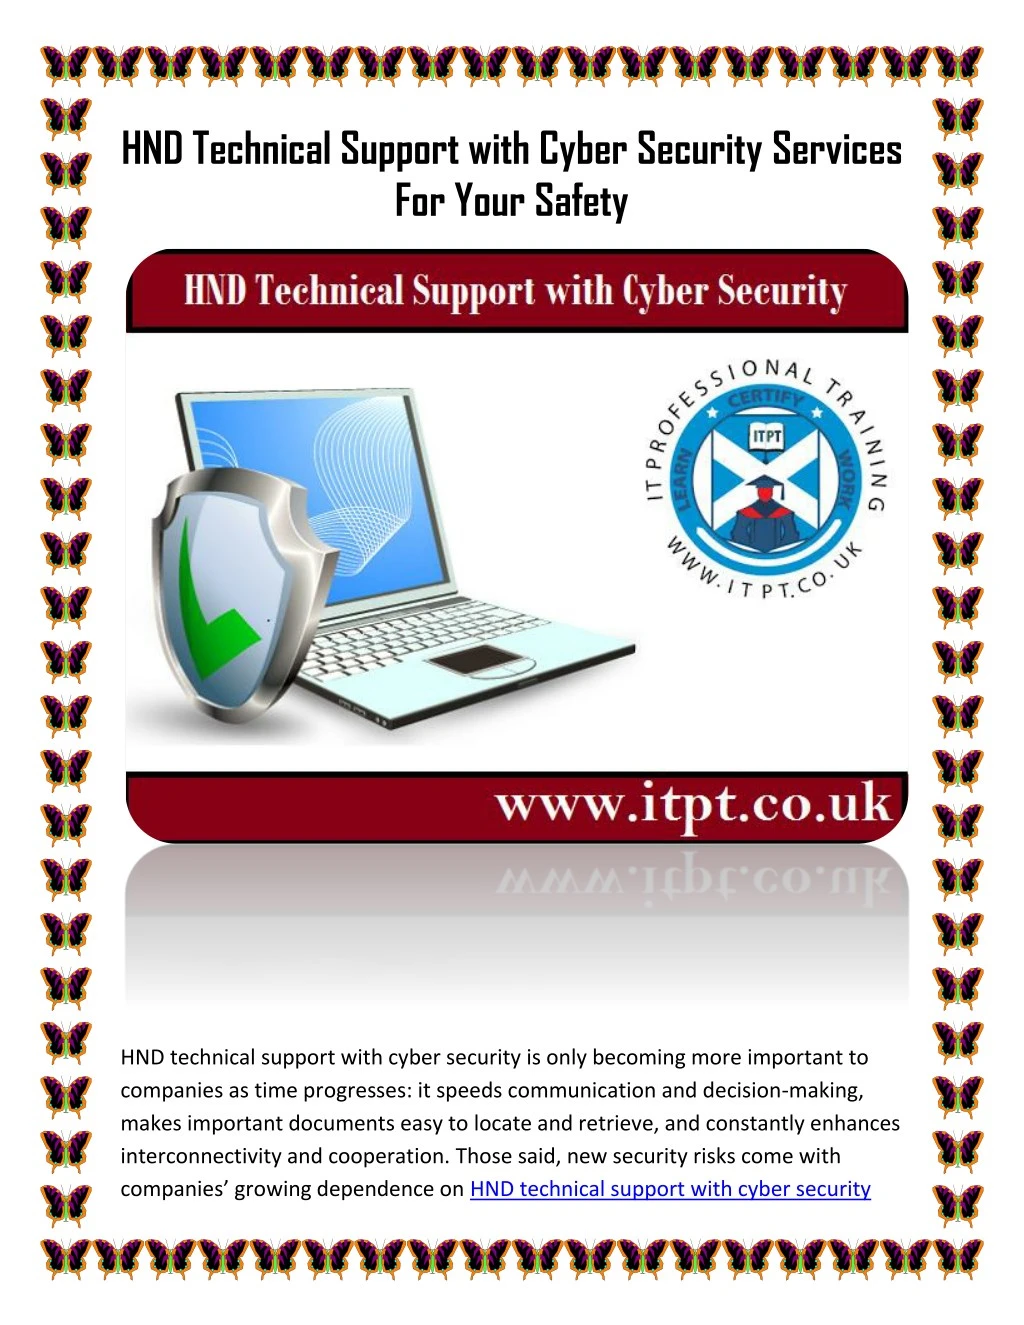 hnd technical support with cyber security